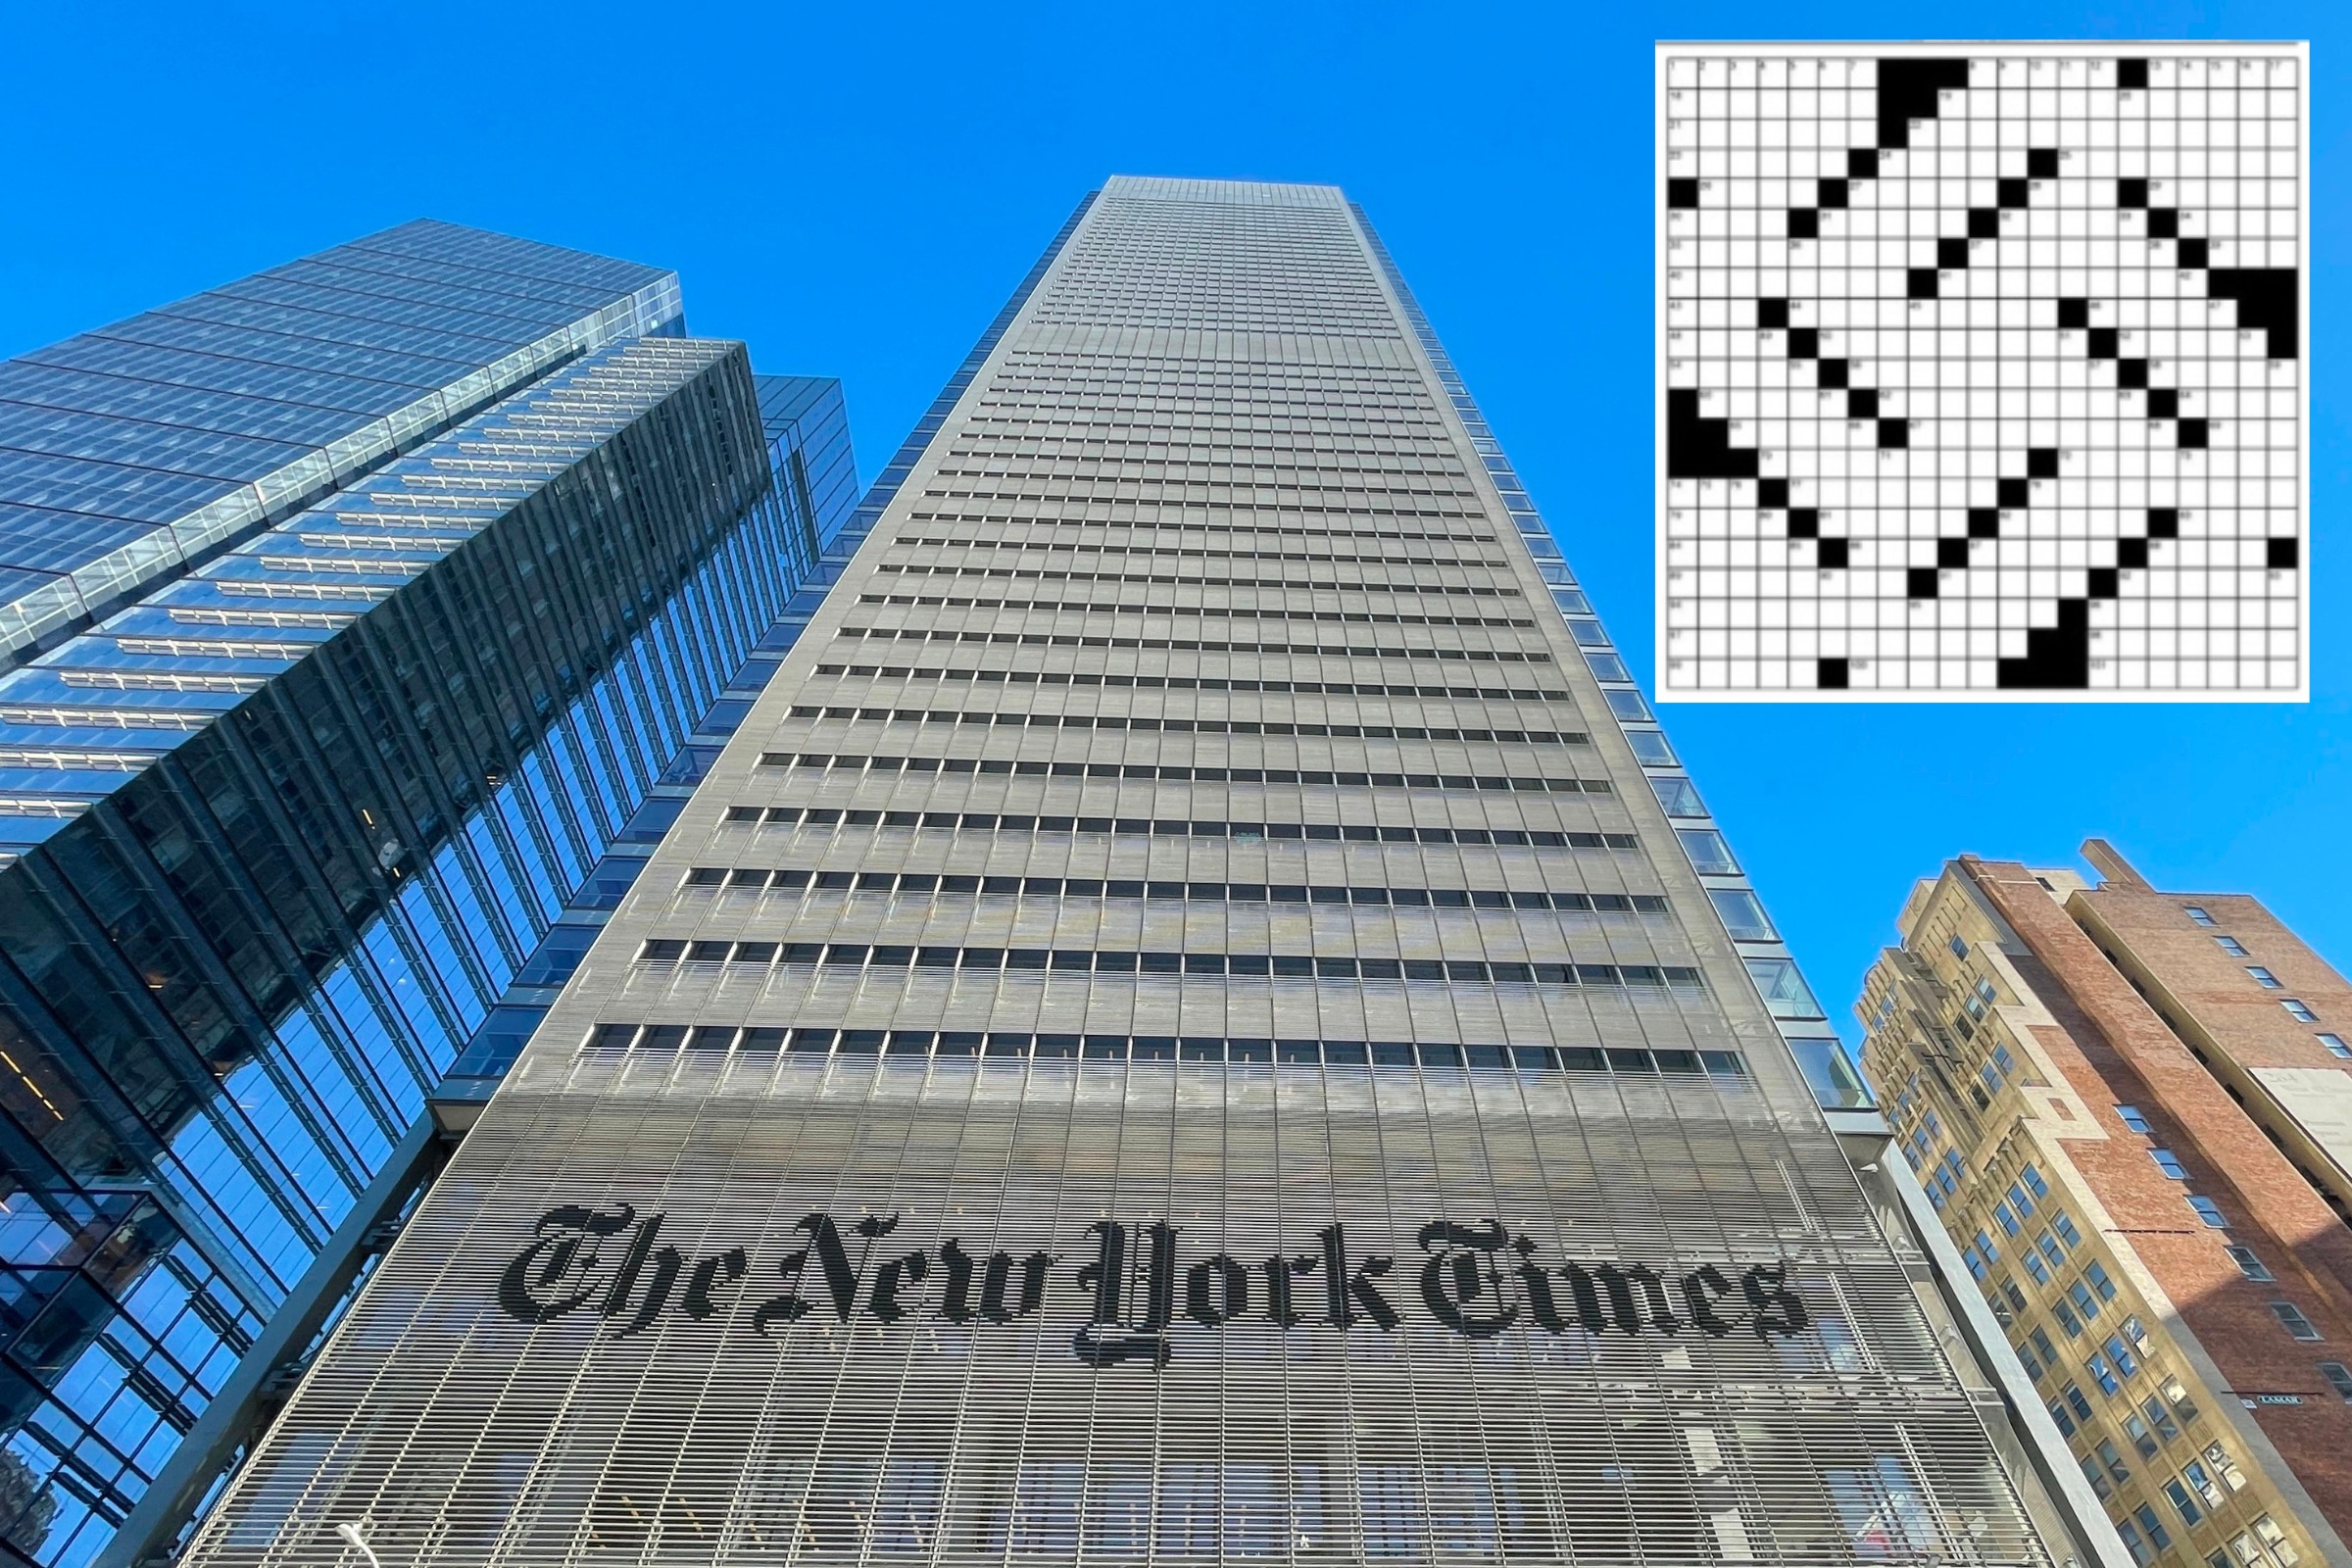 Newsweek: The New York Times Speaks Out on Claims Its Crossword